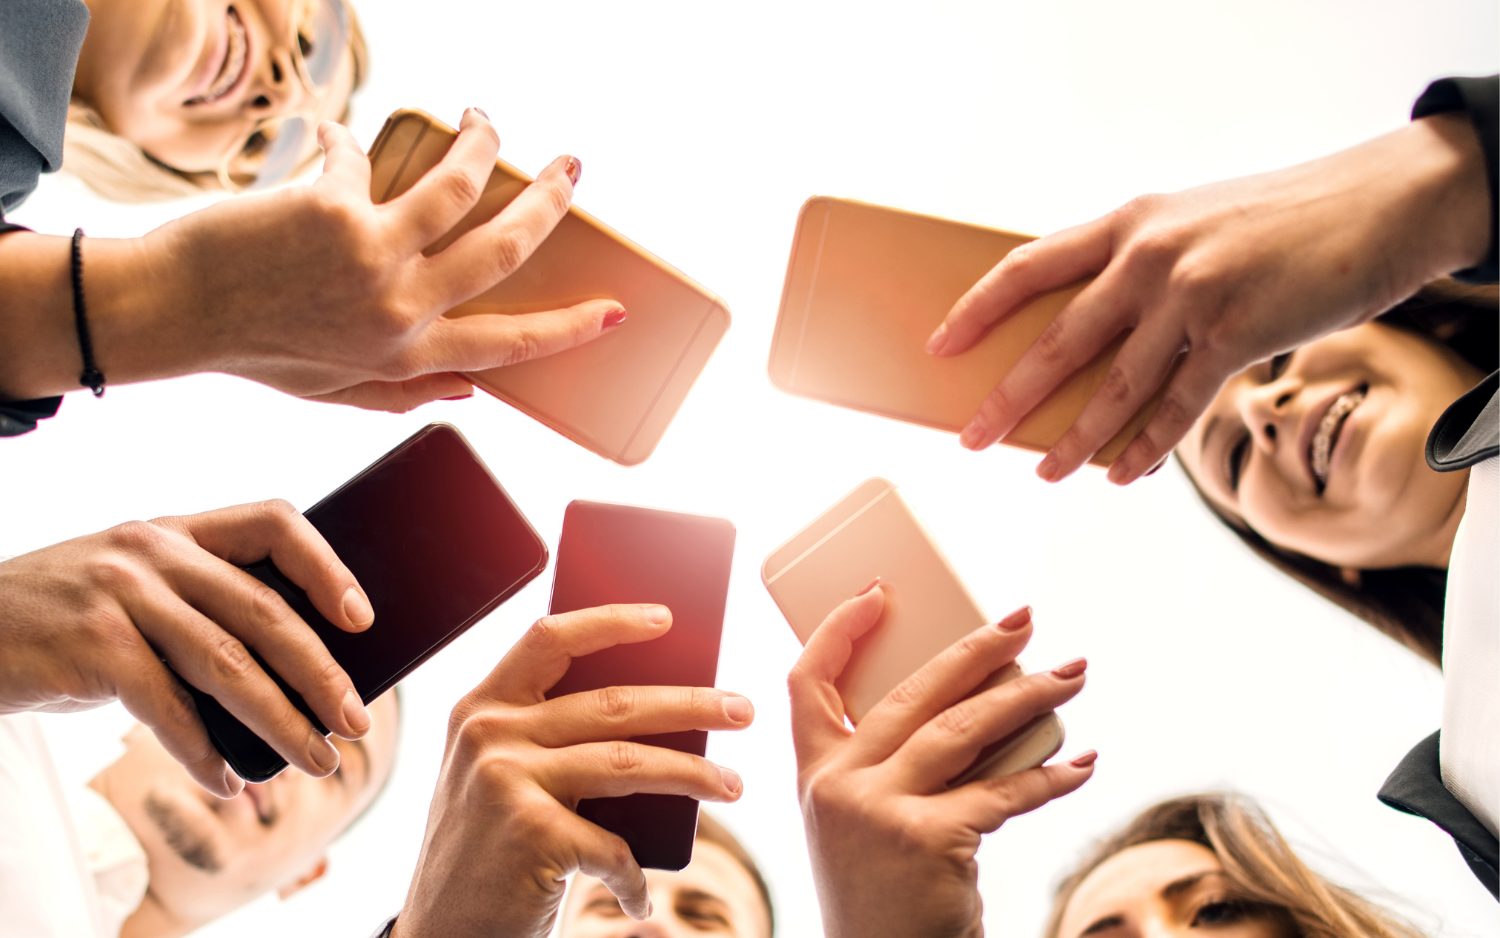 Group of people standing together all looking at their phones with varying facial expressions